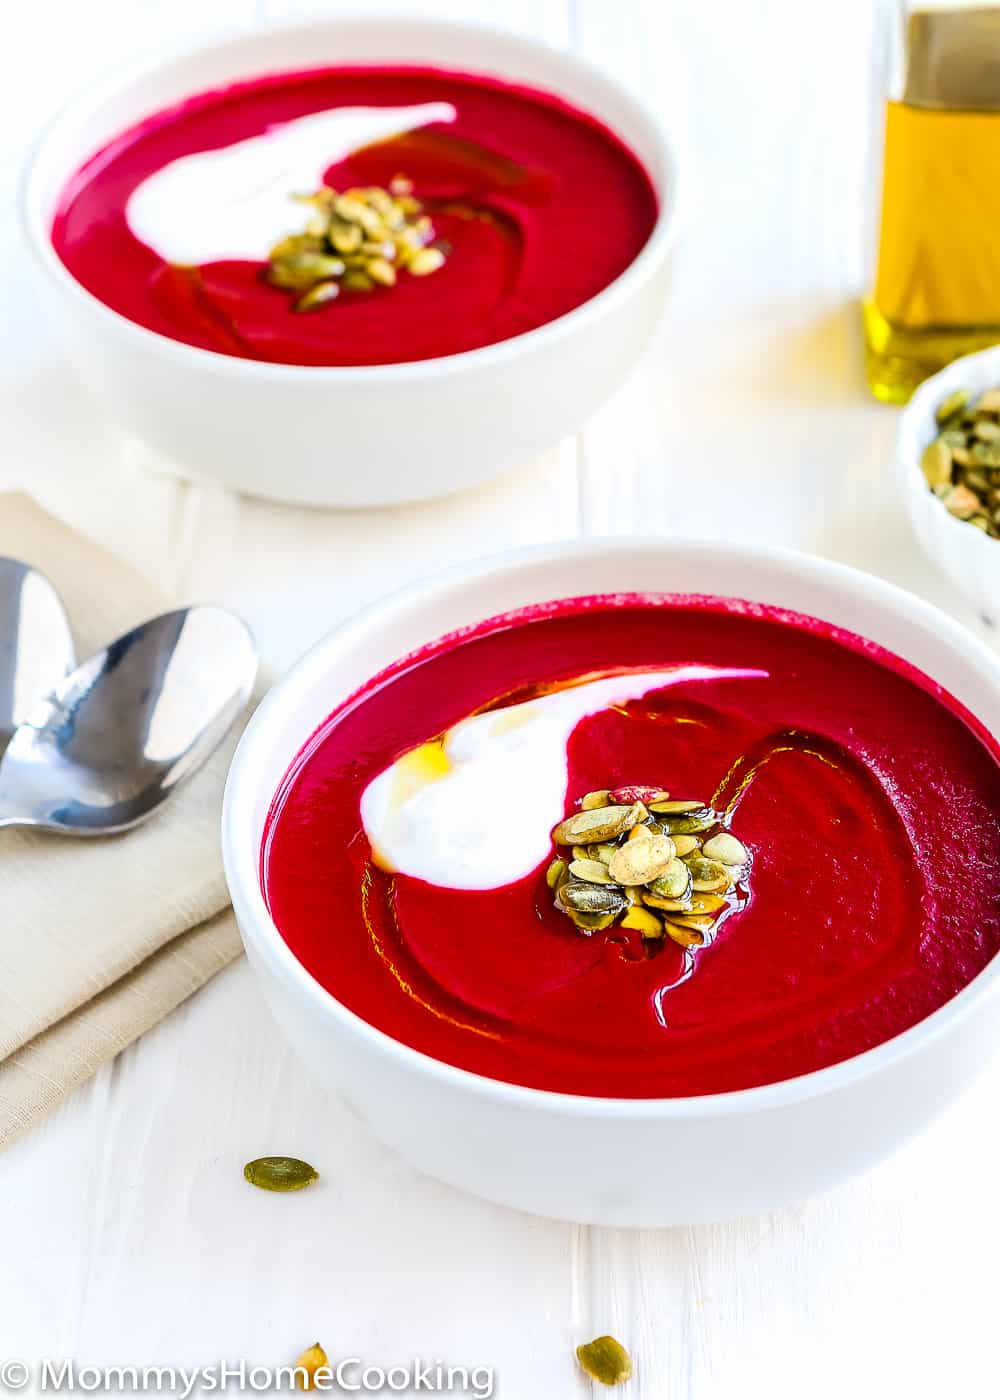 Easy Instant Pot Beet and Leek Soup - Mommy's Home Cooking